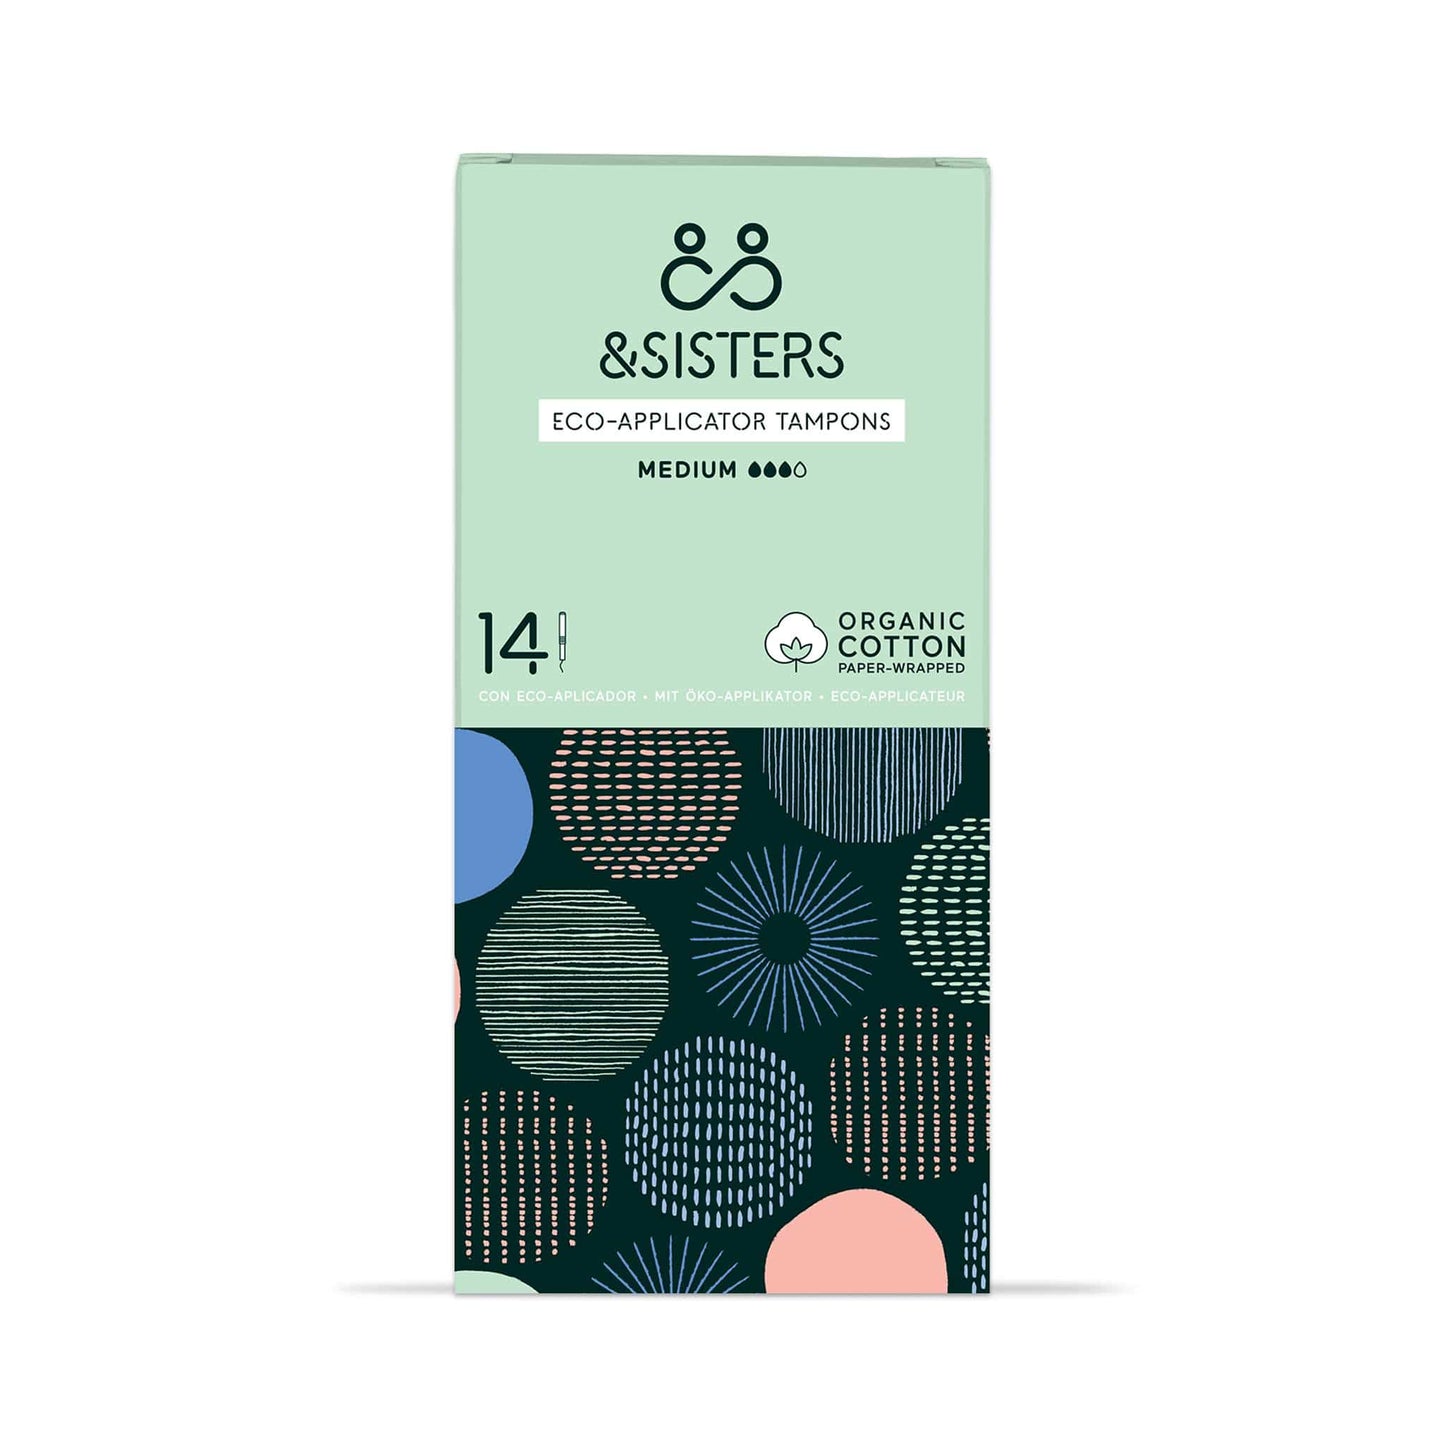 & SISTERS Tampons Medium Eco-applicator Tampons - Plastic-Free and Organic Cotton - & SISTERS